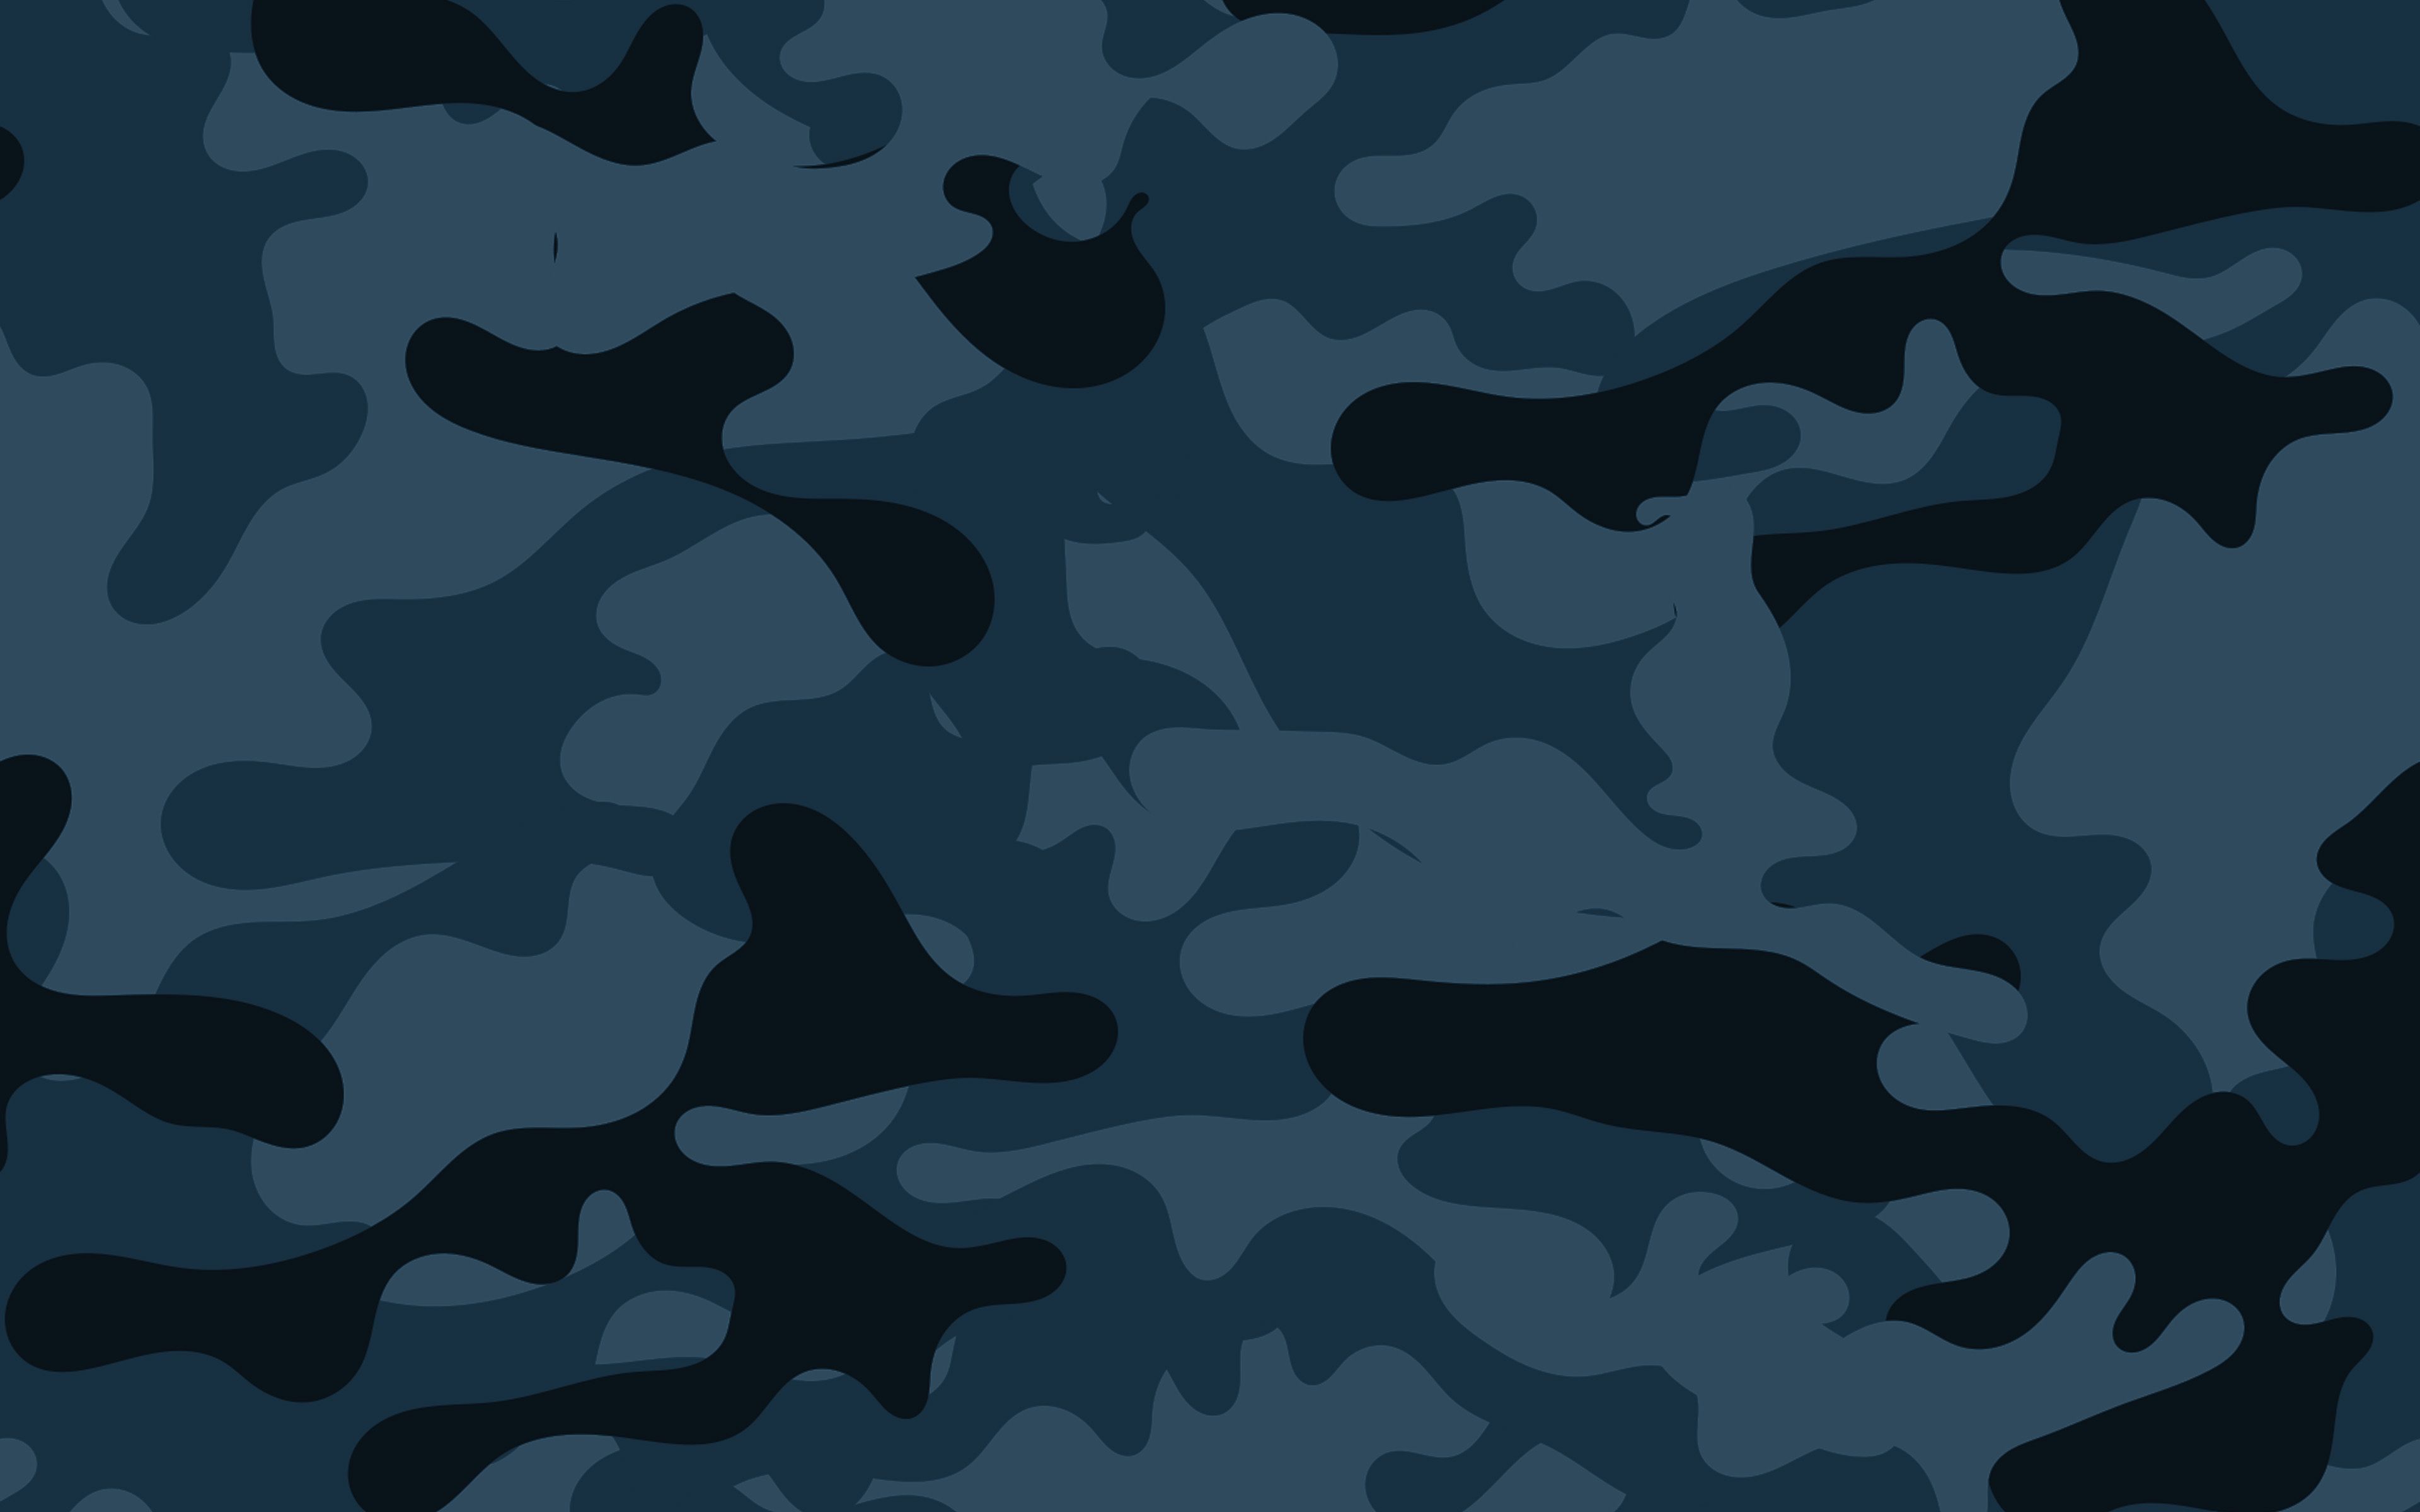 Download wallpaper winter camouflage texture, blue camouflage texture, blue camouflage background, camouflage texture for desktop with resolution 3840x2400. High Quality HD picture wallpaper